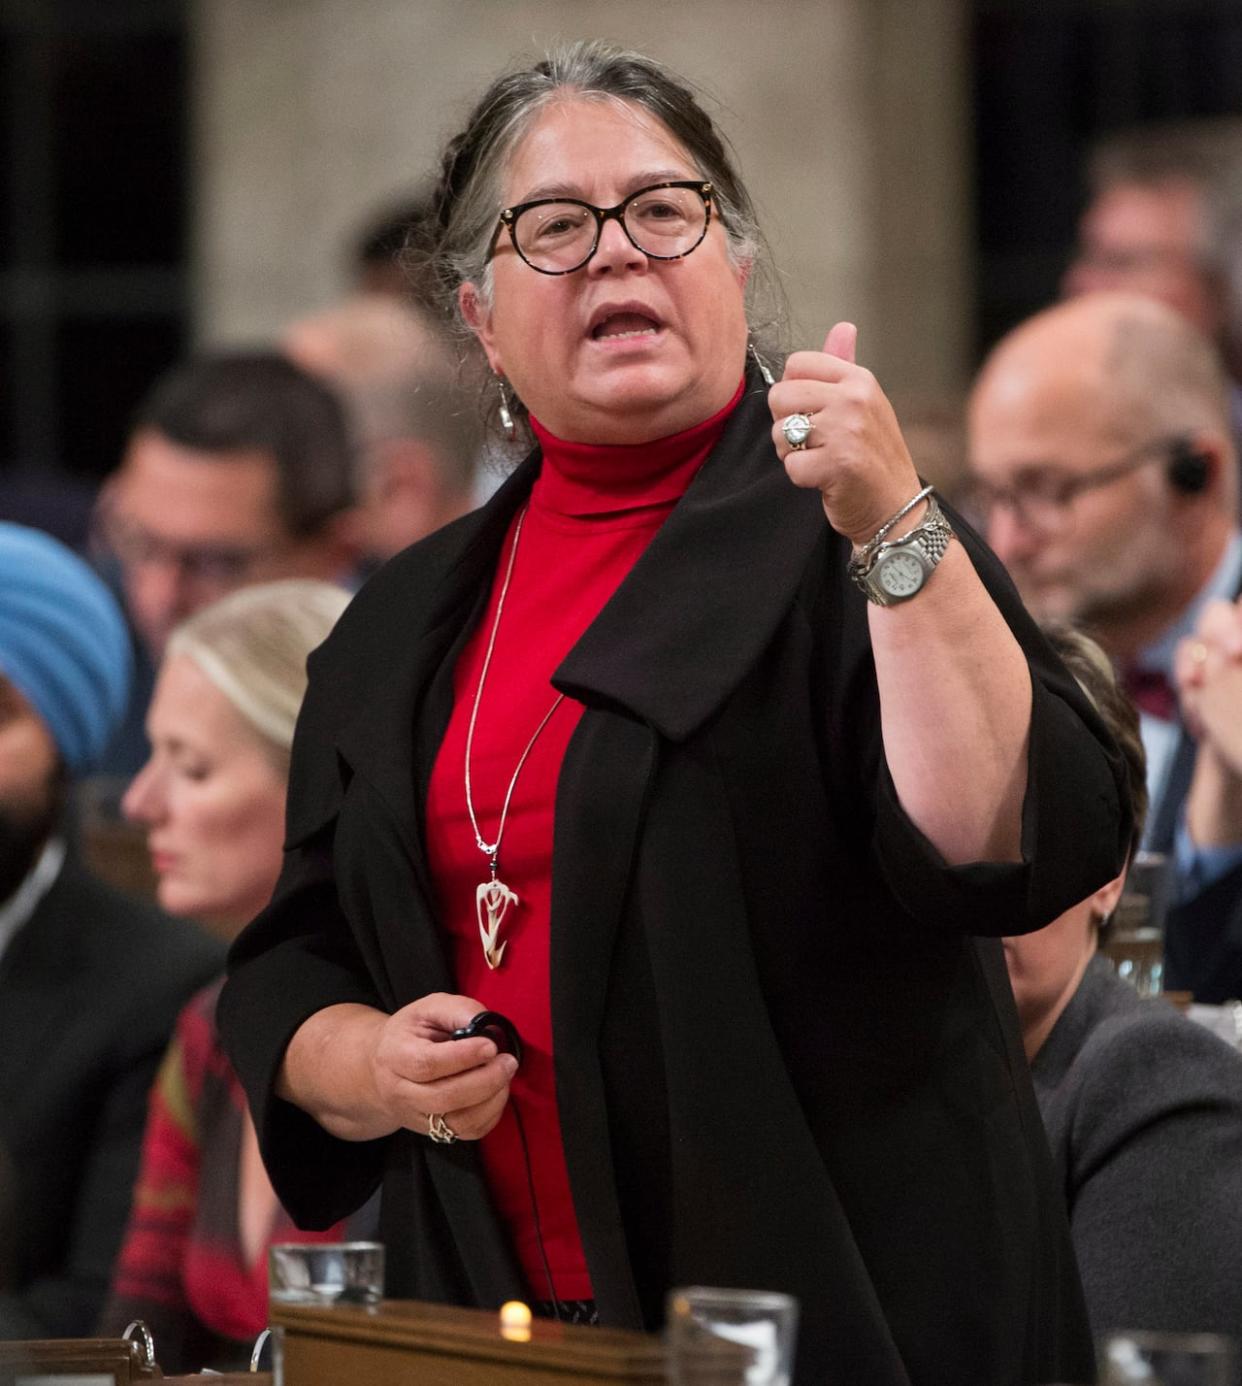 Minister of National Revenue Diane Lebouthillier responds to a question during Question Period in the House of Commons in Ottawa on Thursday, October 19, 2017. (Adrian Wyld/The Canadian Press - image credit)